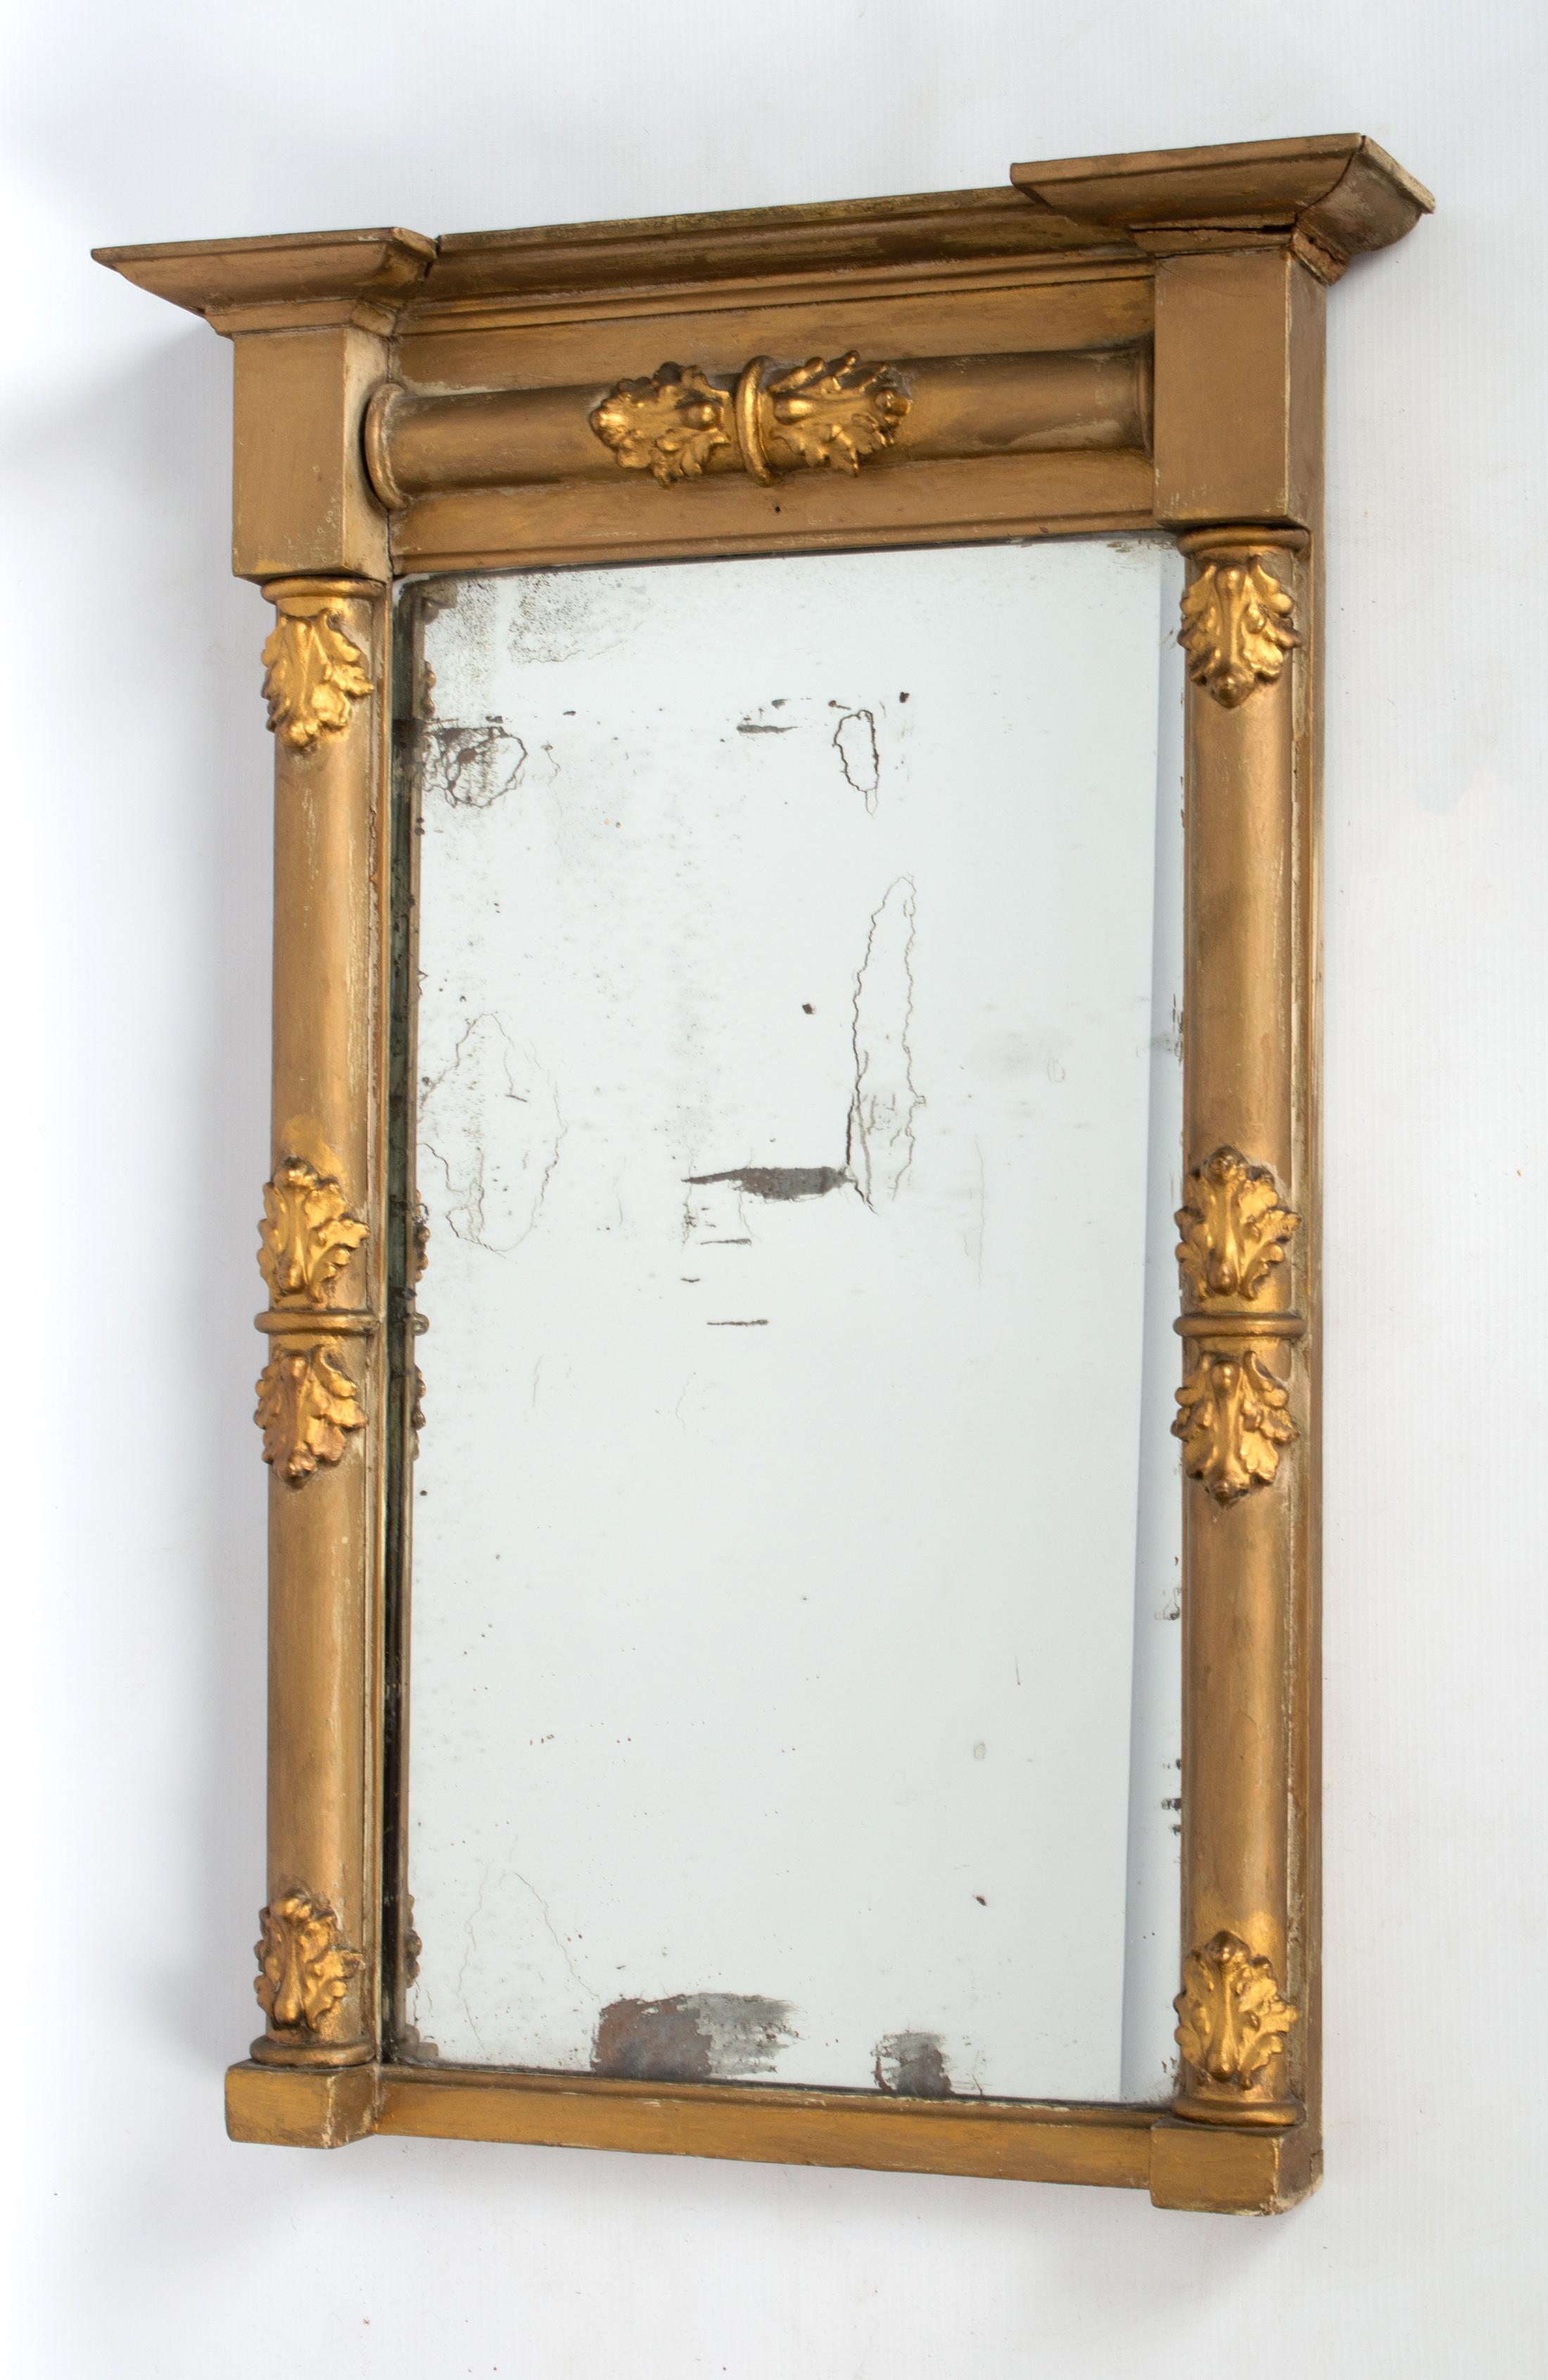 Antique 19th Century English Regency Gesso Pier Mirror C.1820

With original mirror plate, showing ageing. The gilded gesso frame with some distressing, wear to top right corner, and evidence of historic over painting. Please see photos.

